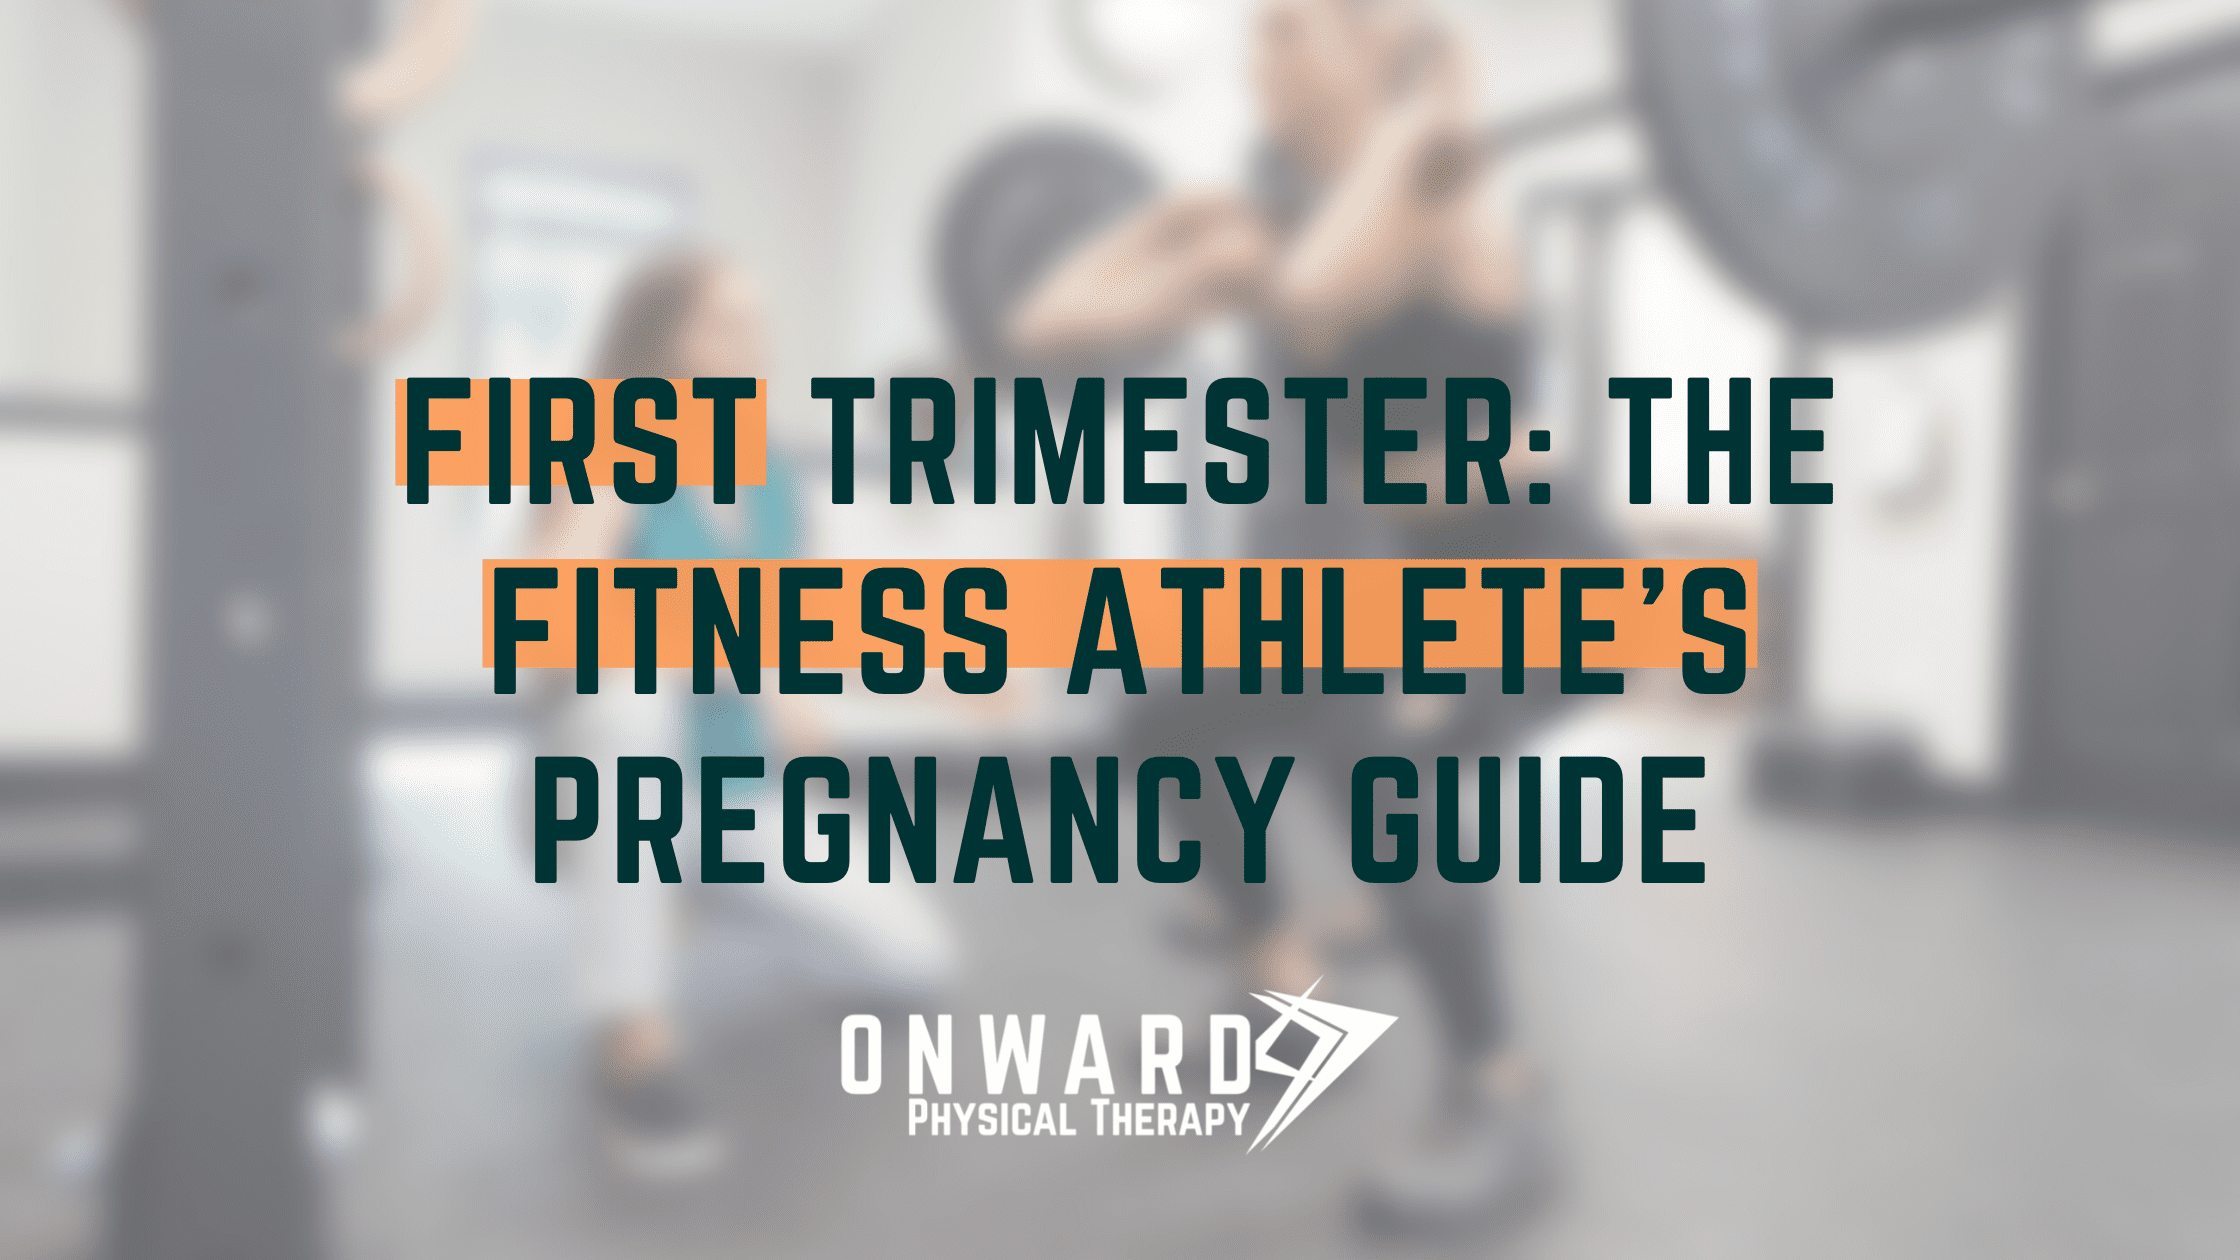 Featured image for “First Trimester: The Fitness Athlete’s Pregnancy Guide”